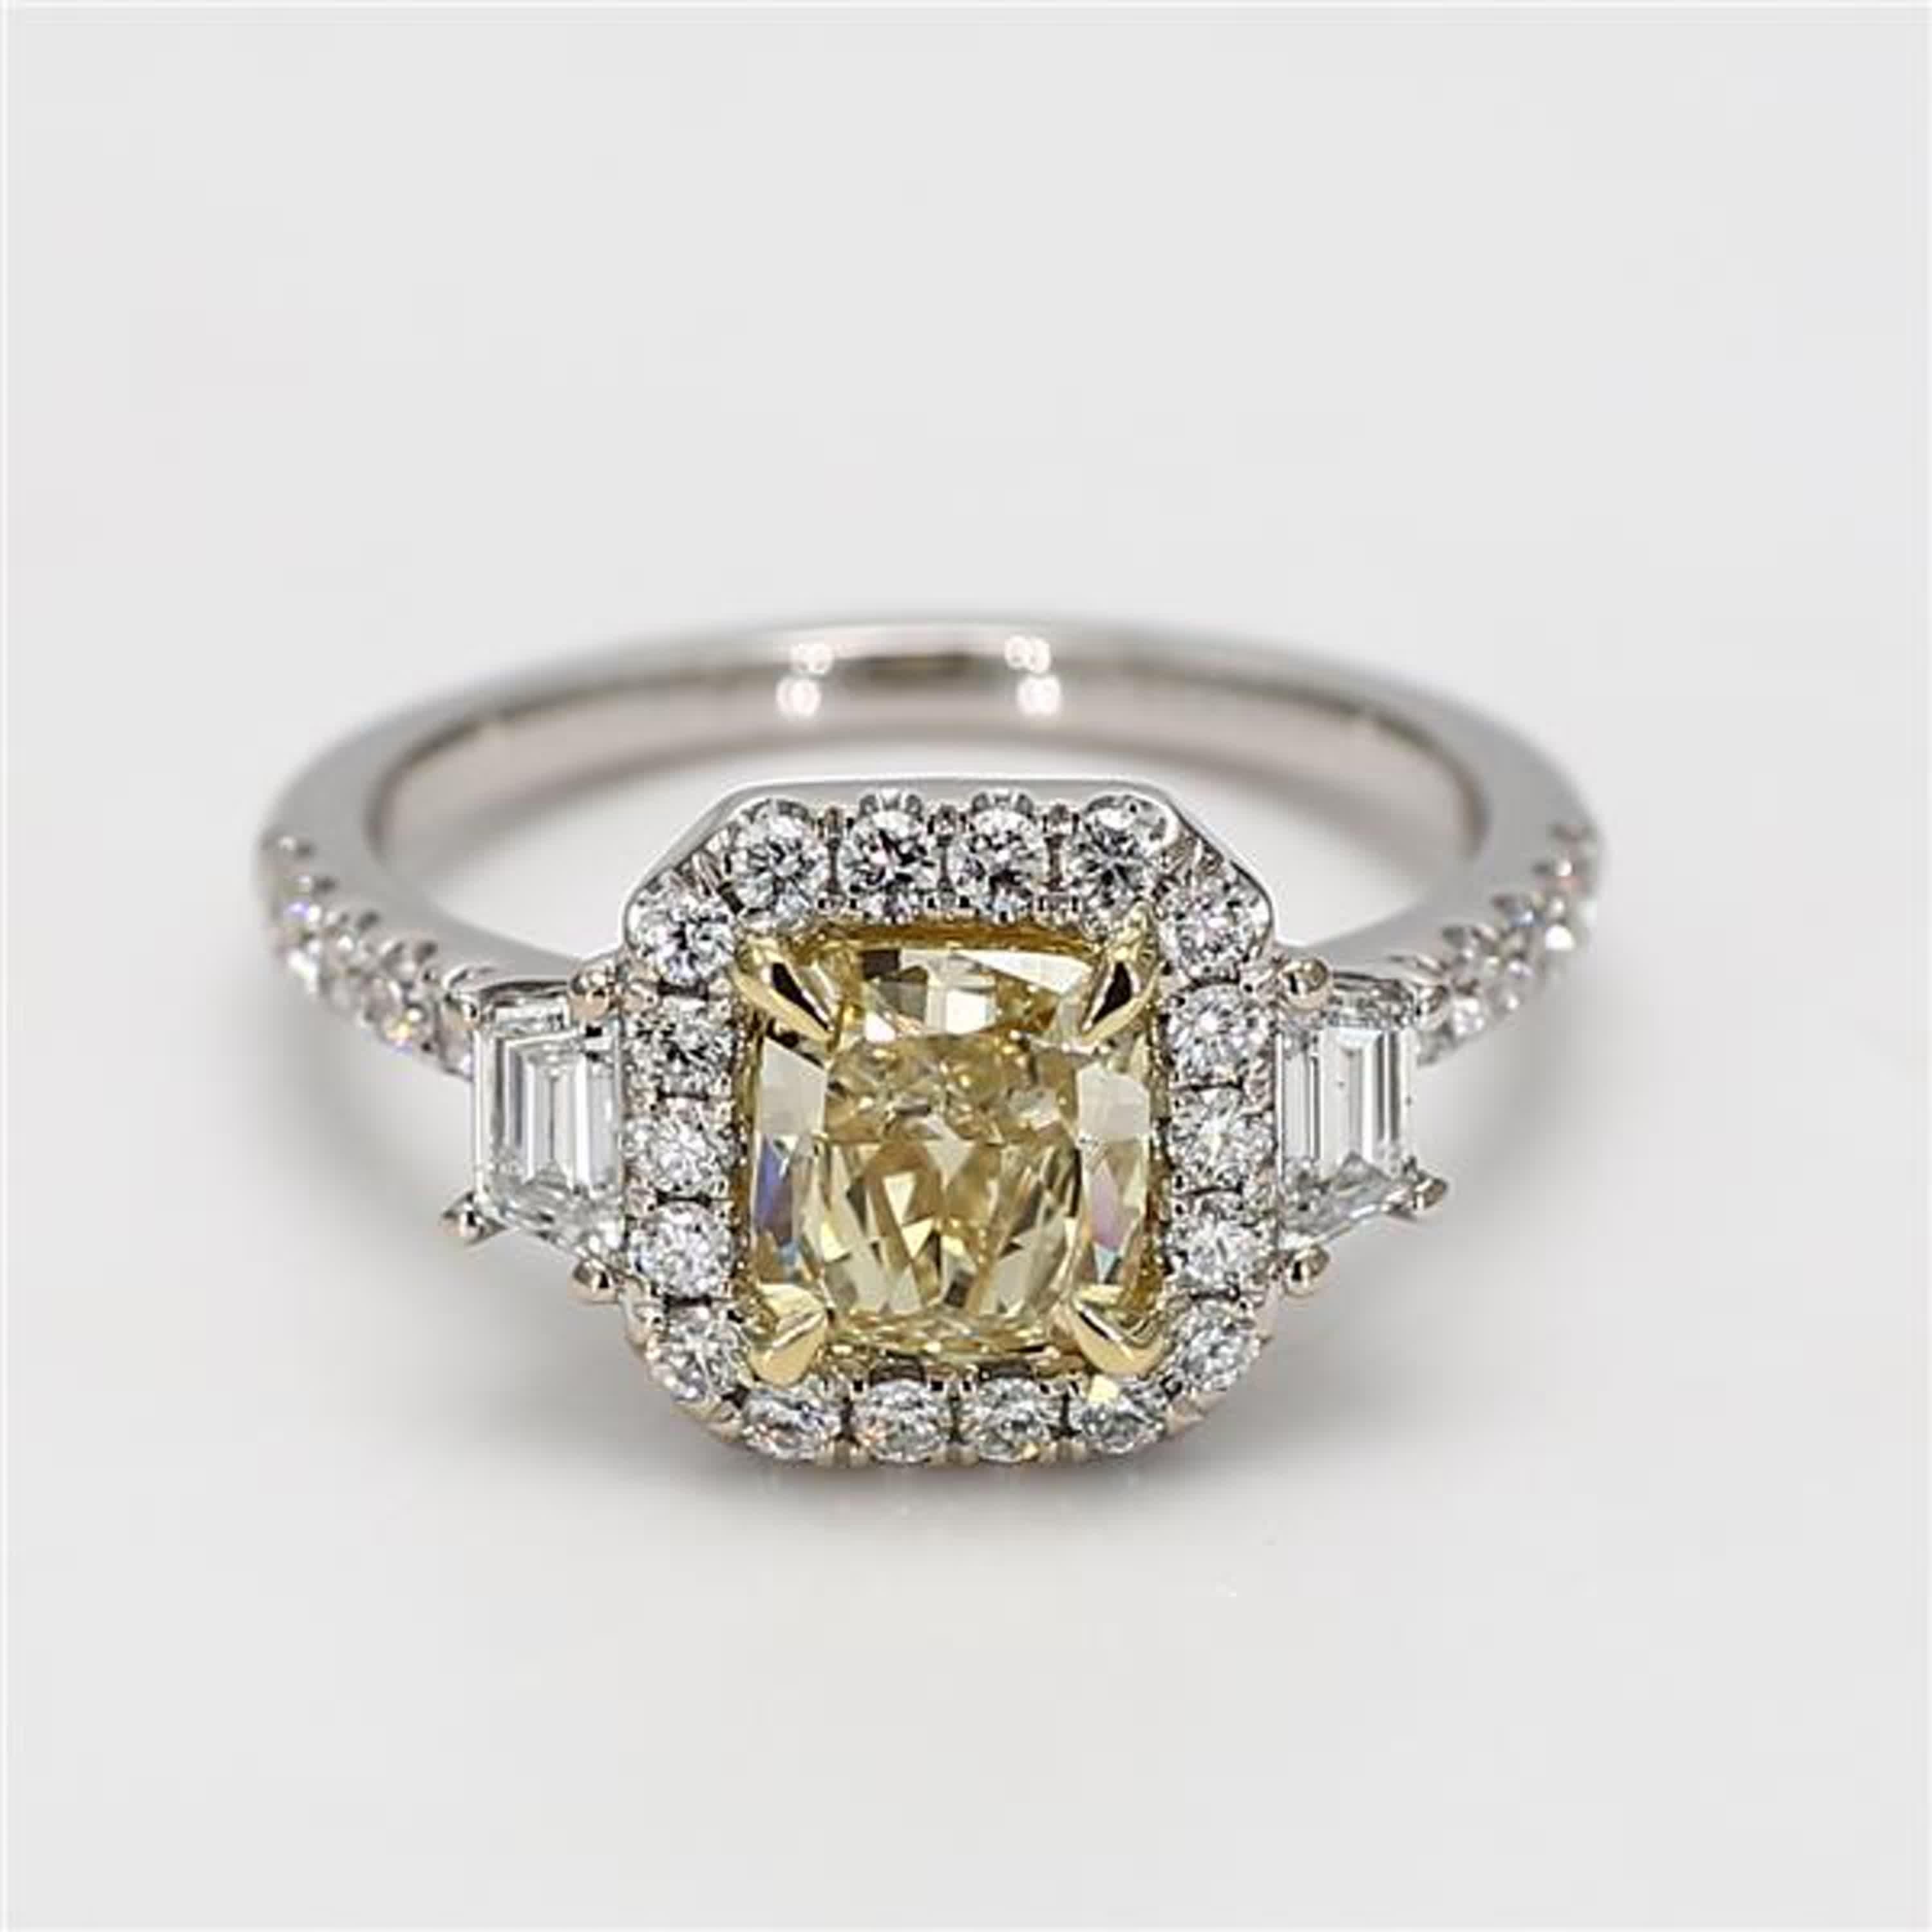 RareGemWorld's classic GIA certified diamond ring. Mounted in a beautiful 18K Yellow and White Gold setting with a natural cushion cut yellow diamond. The yellow diamond is surrounded by natural taper baguette white diamonds and round natural white